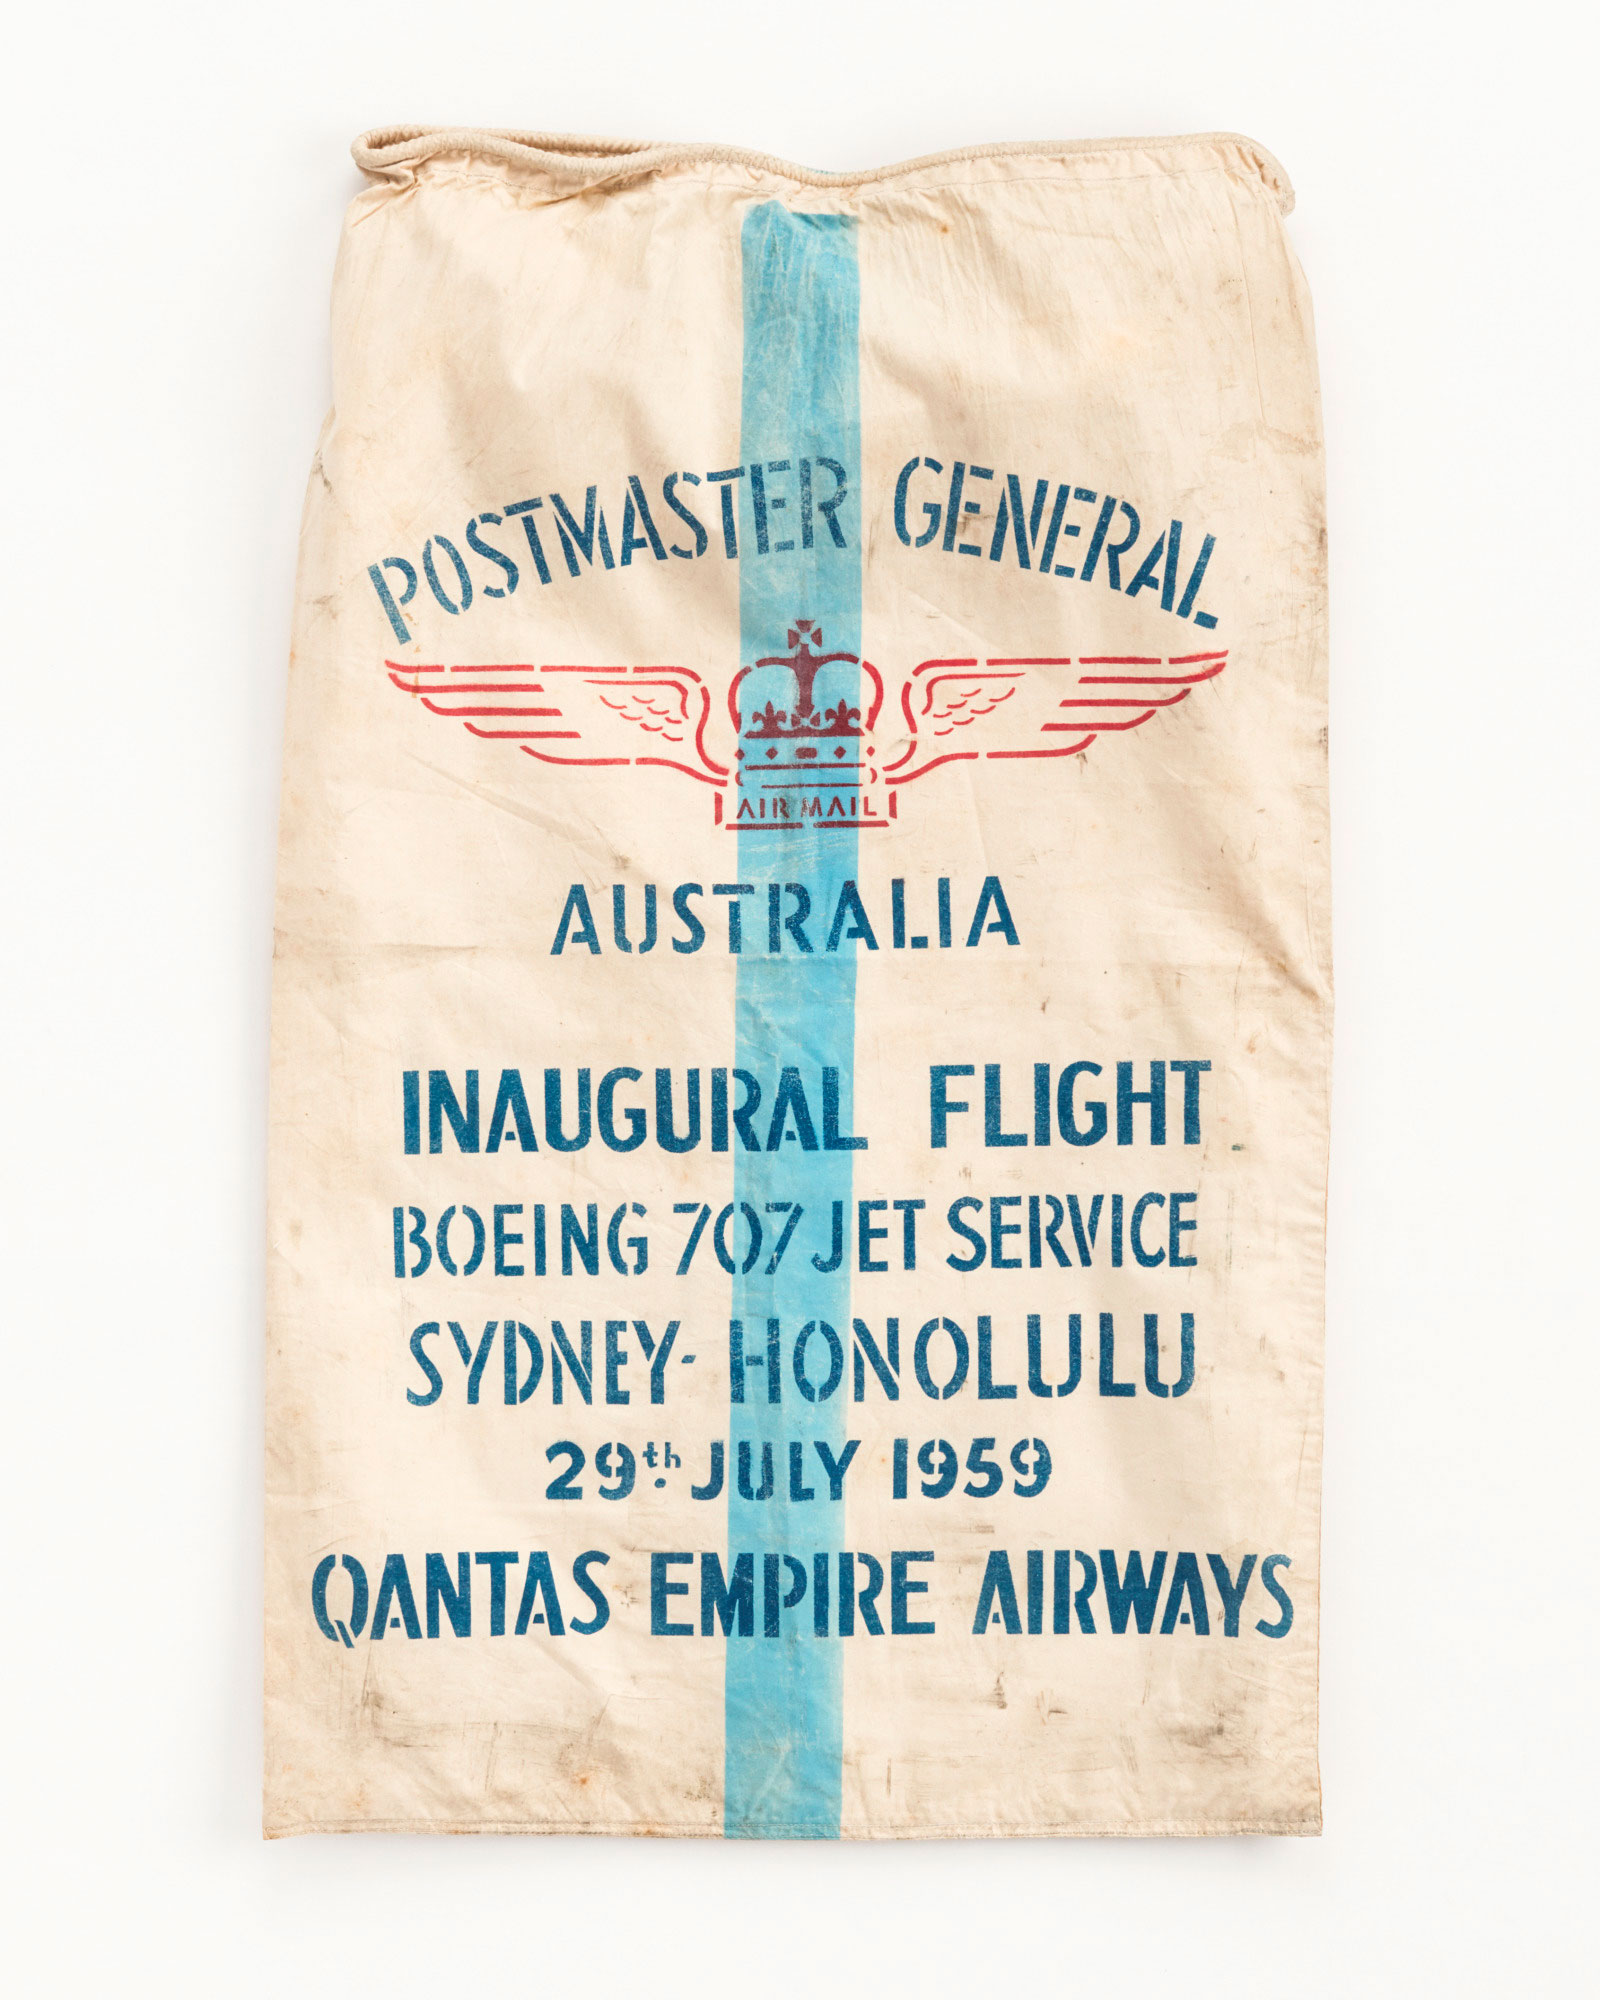 White canvas post bag celebrating the first Qantas flight between Sydney and Honolulu, 1959.